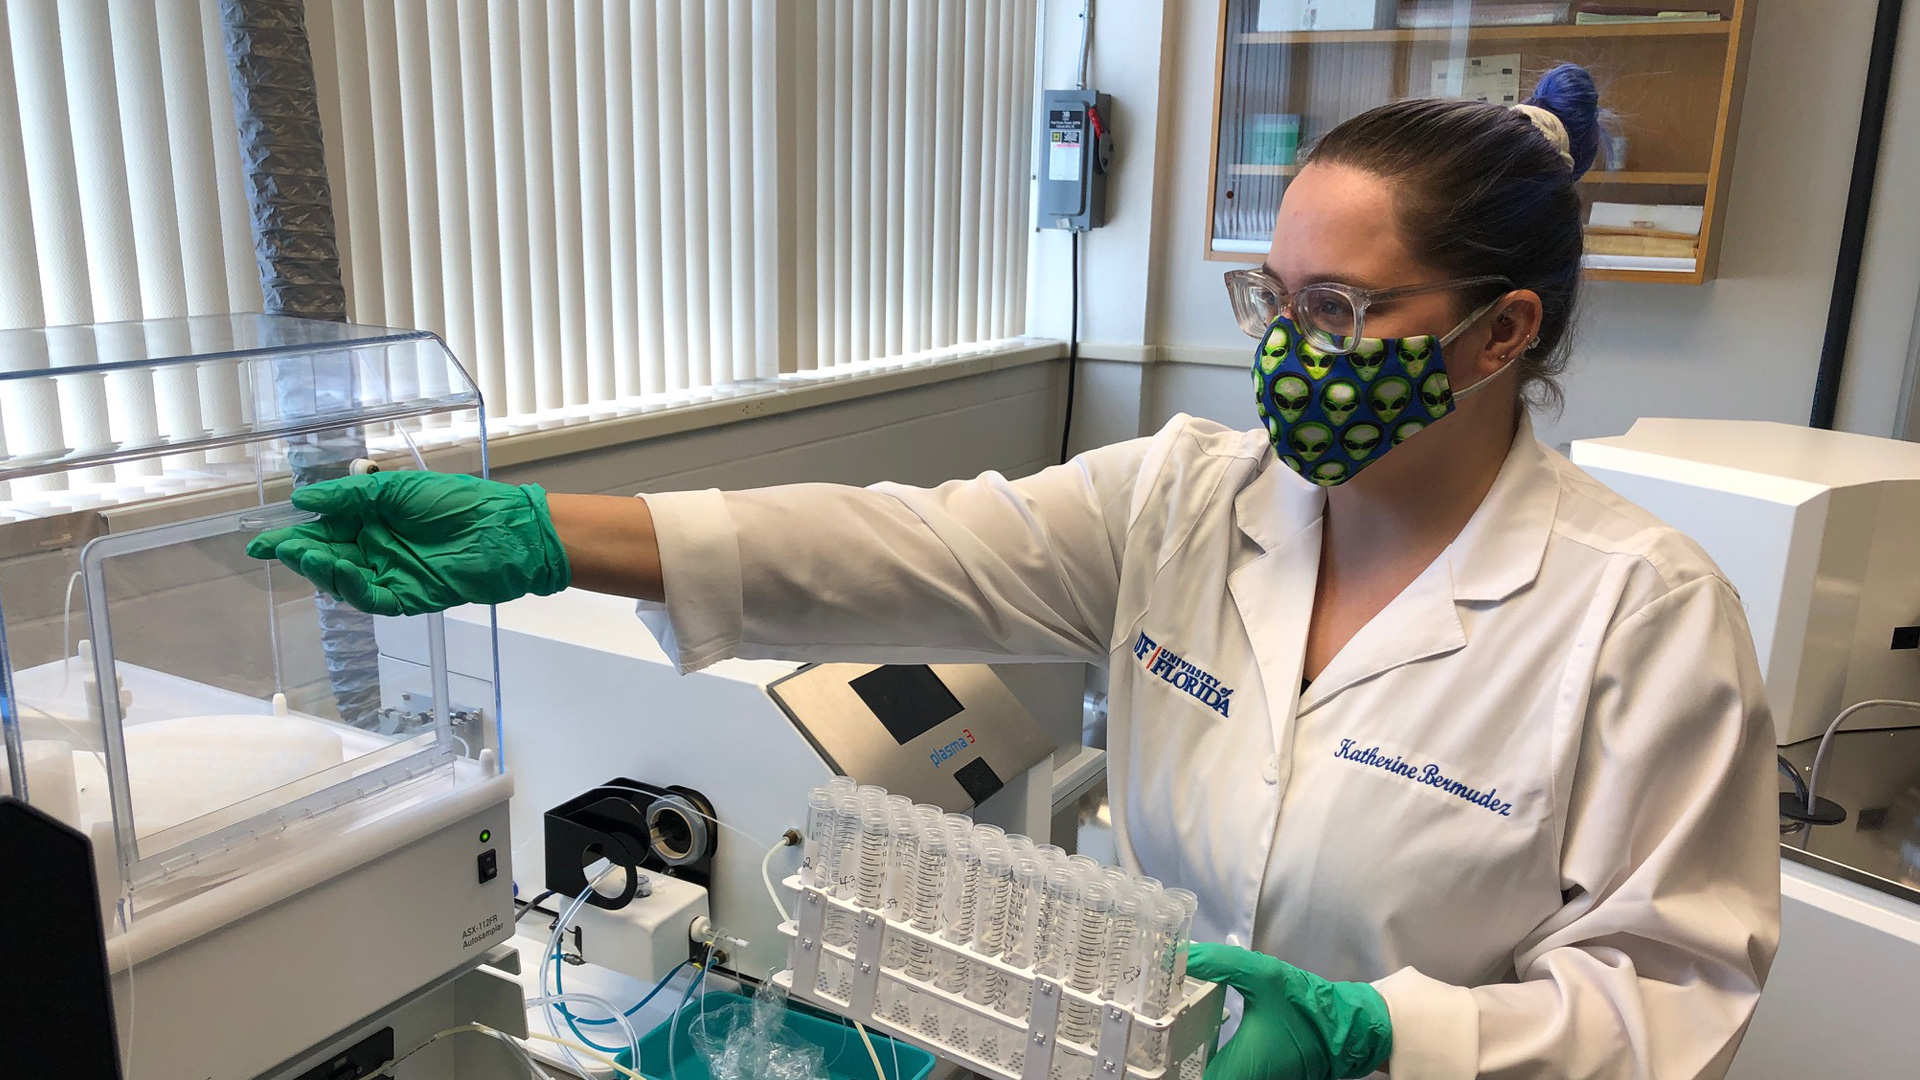 Katherine Bermudez conducts research in lab wearing PPE.